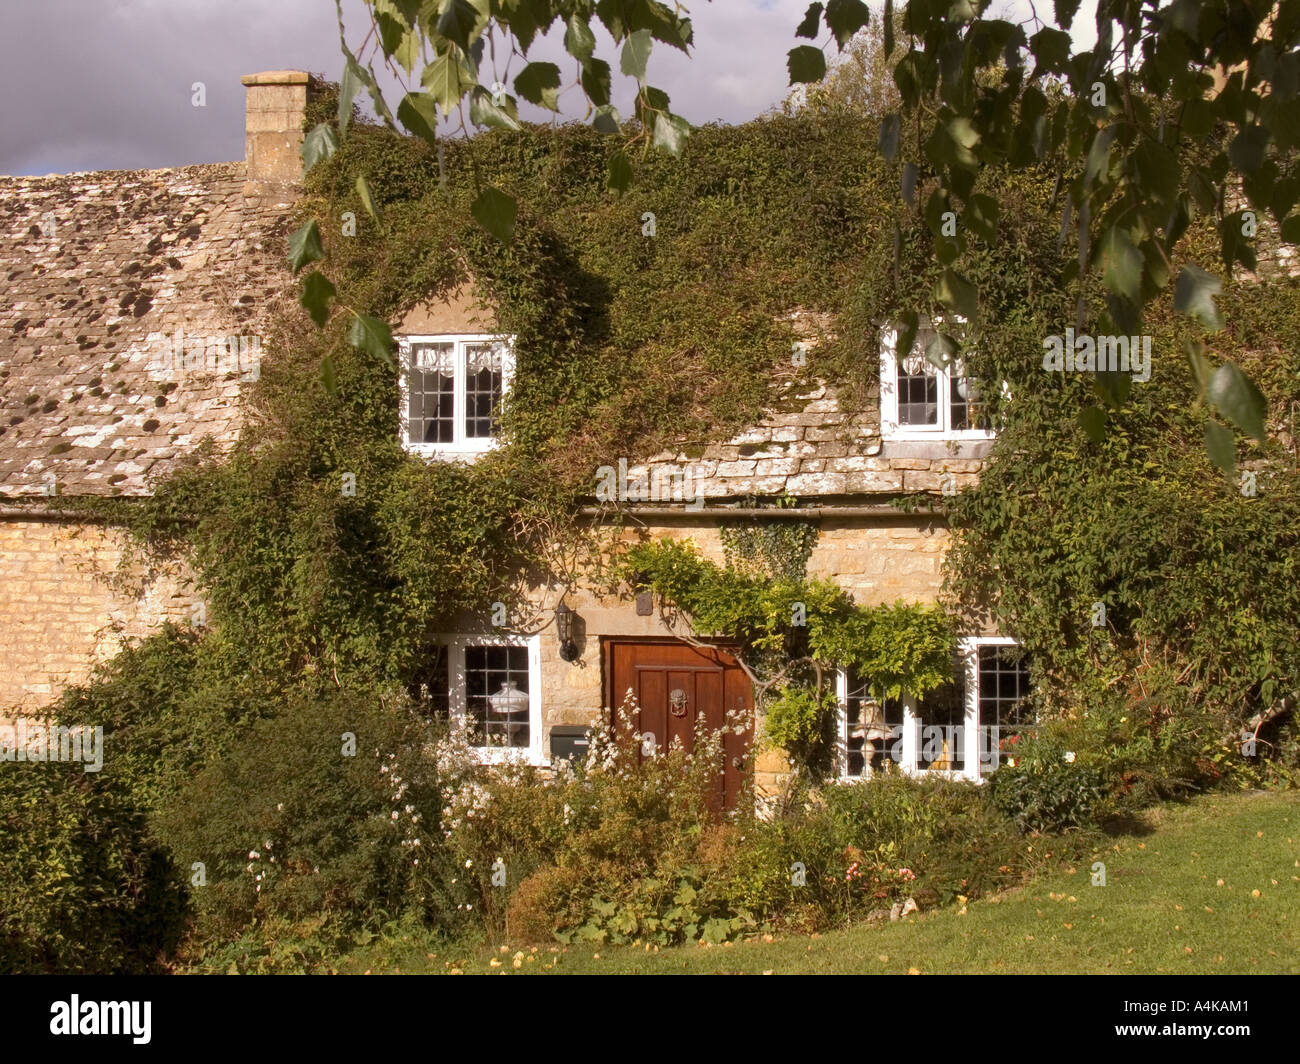 Oxfordshire Burford Cotswold stone country cottage Stock Photo